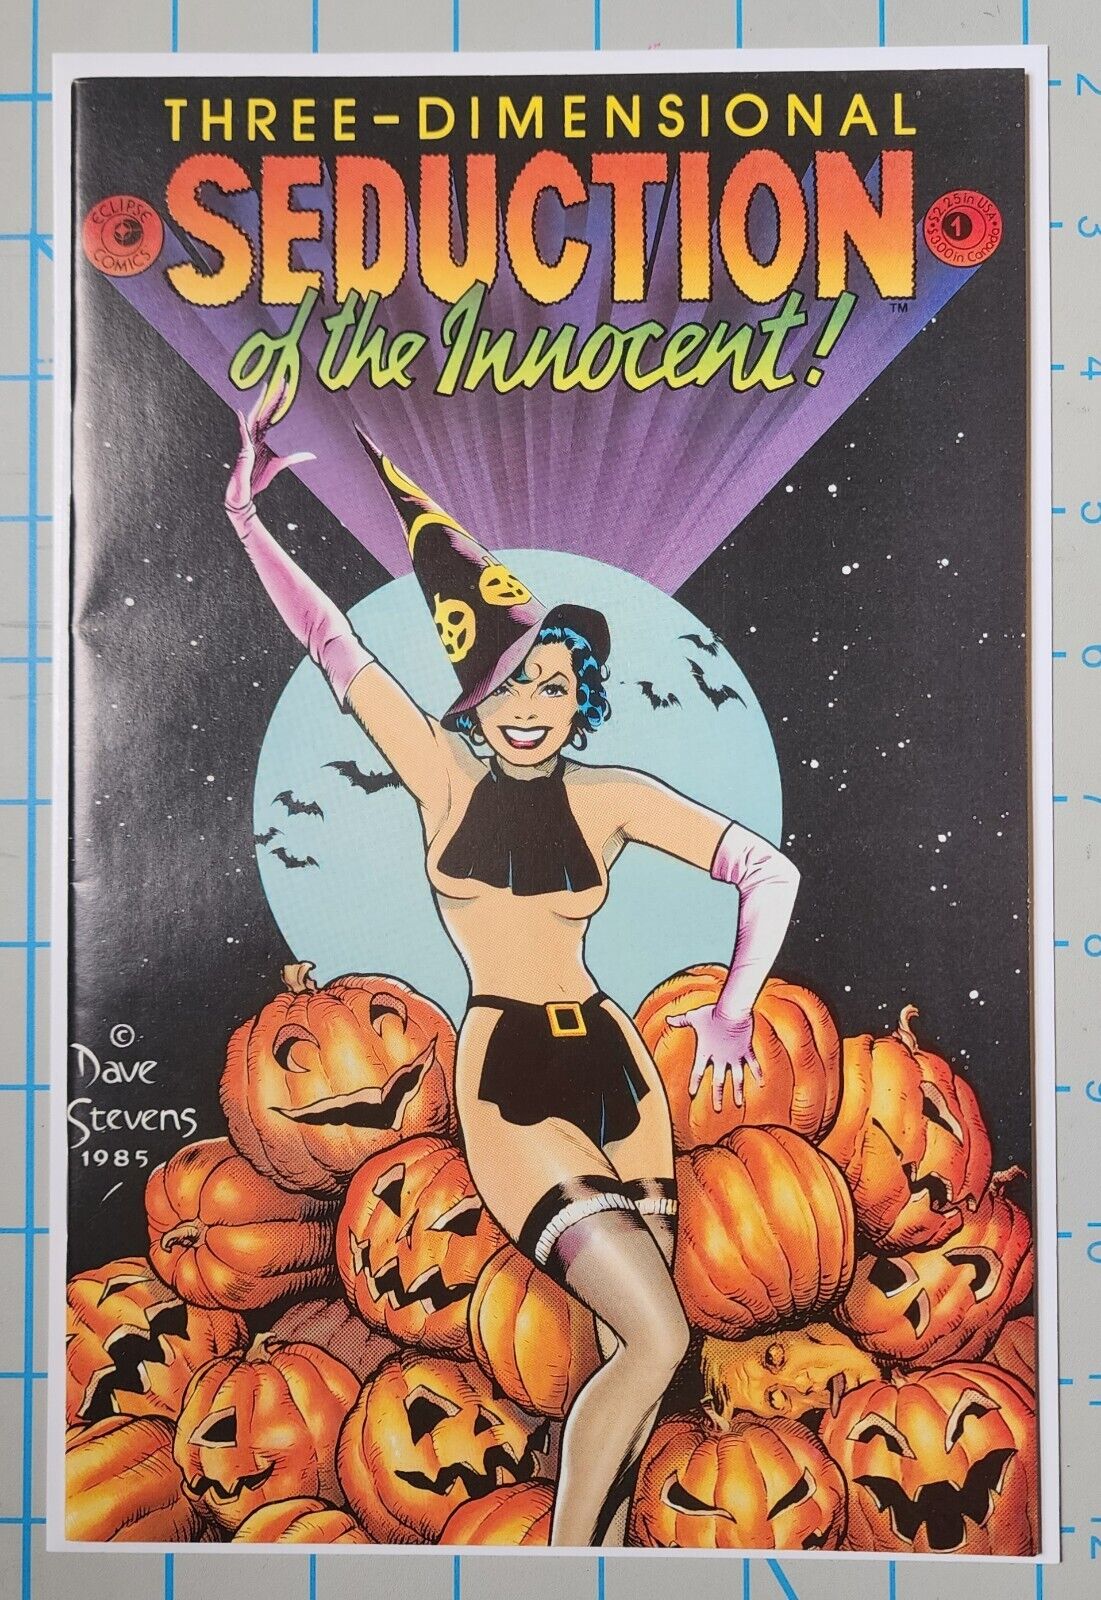 Seduction of the Innocent #1 - 3-D No Glasses - Dave Stevens Cover -1985